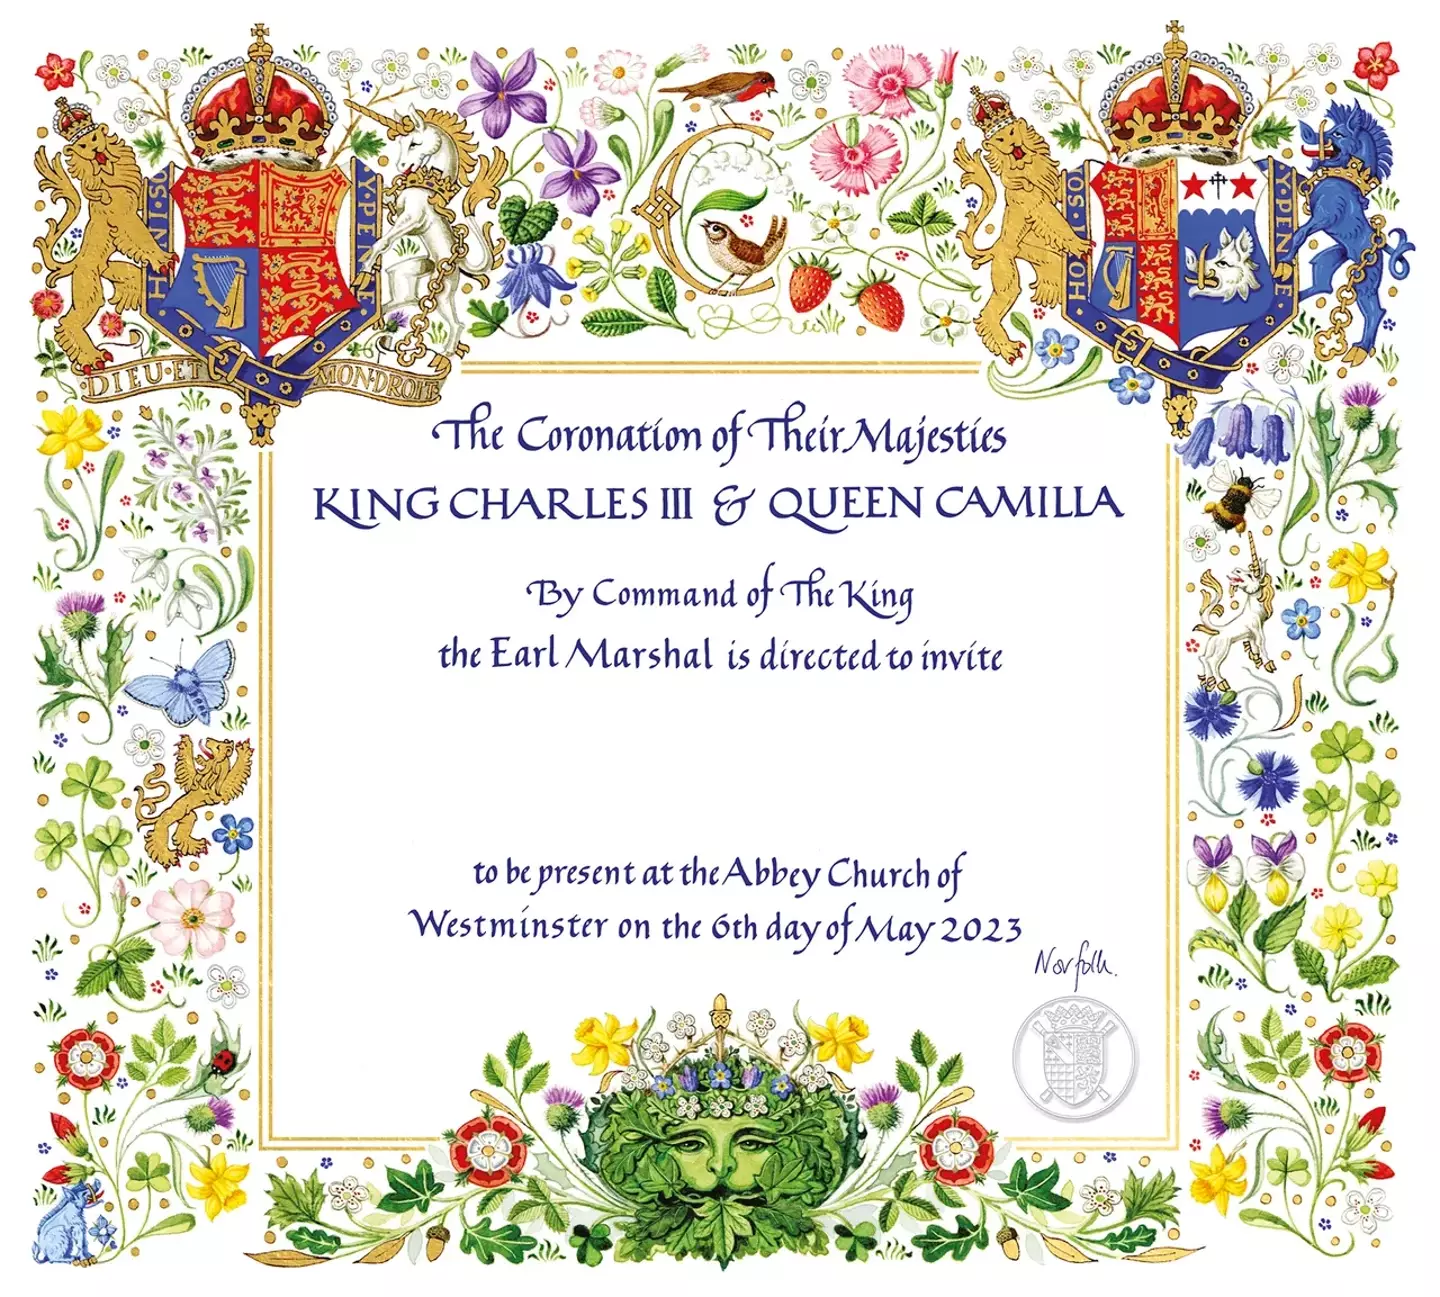 The official invitation to Charles' coronation named her as Queen Camilla.